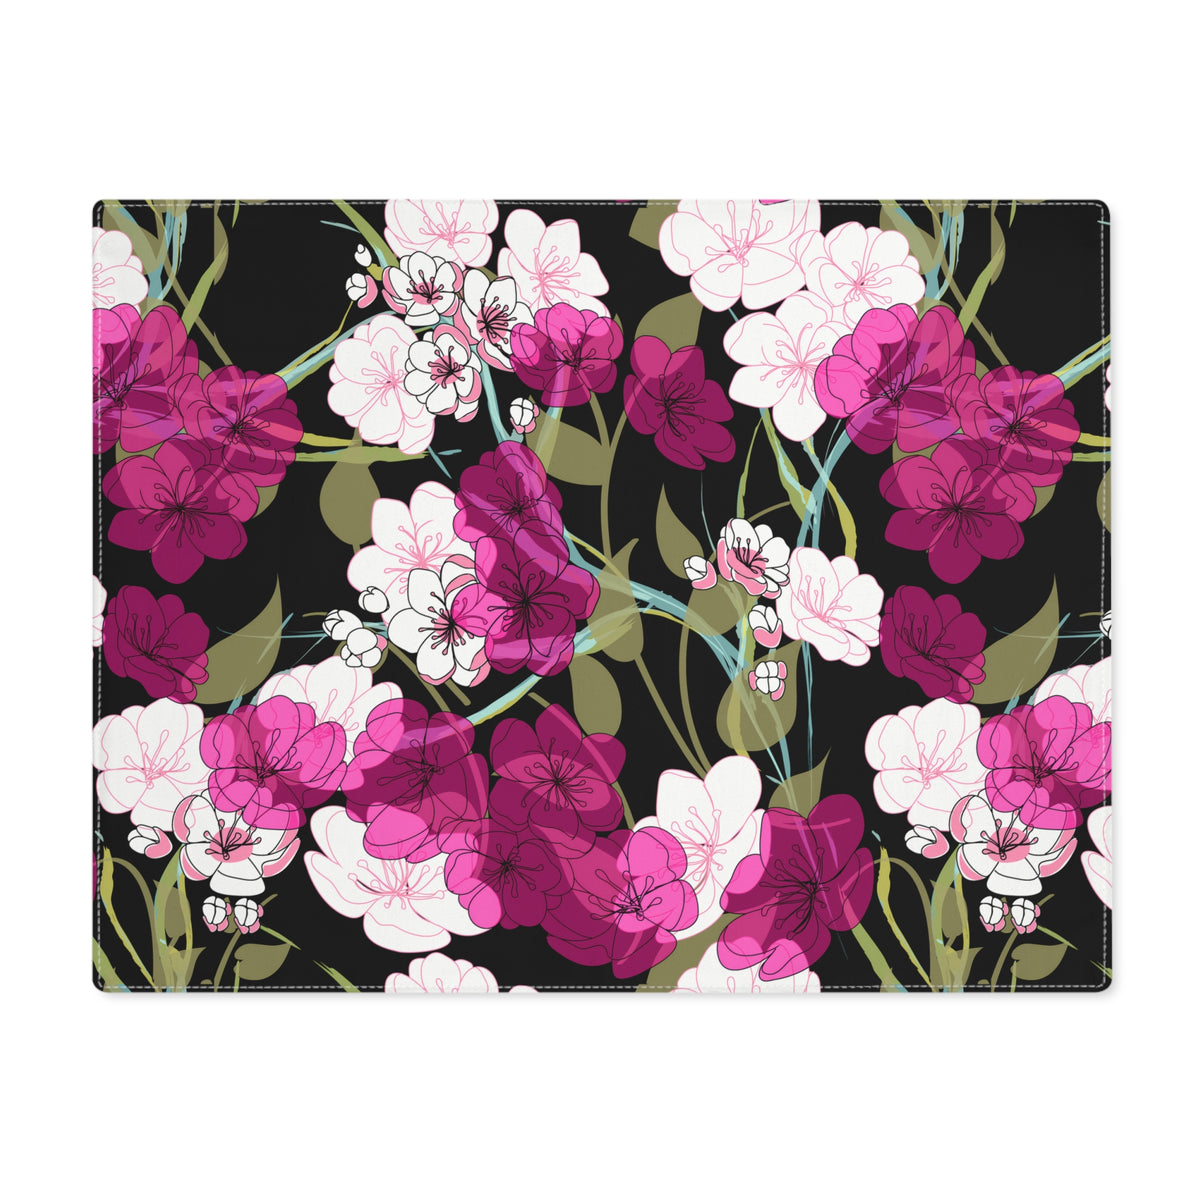 Decorative Cotton Place Mat with Midnight Cherry Blossom Design (18&quot; x 14&quot;)